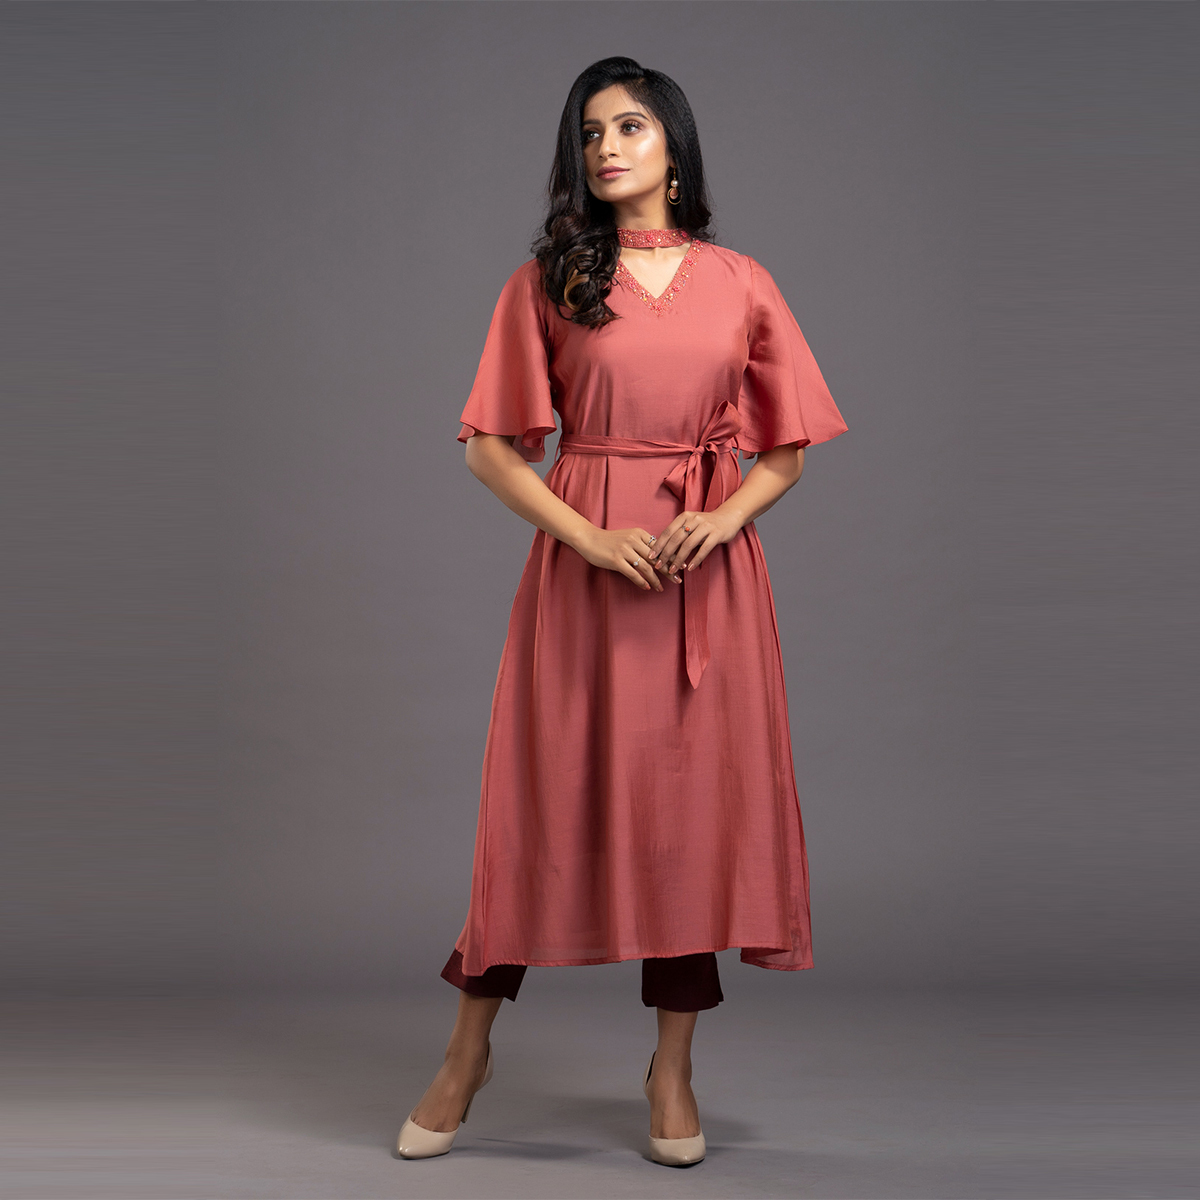 Zella Bell Sleeve Flare Dress Styled With Embellished Chocker Neck & Waist Tie-Up - Onion Pink